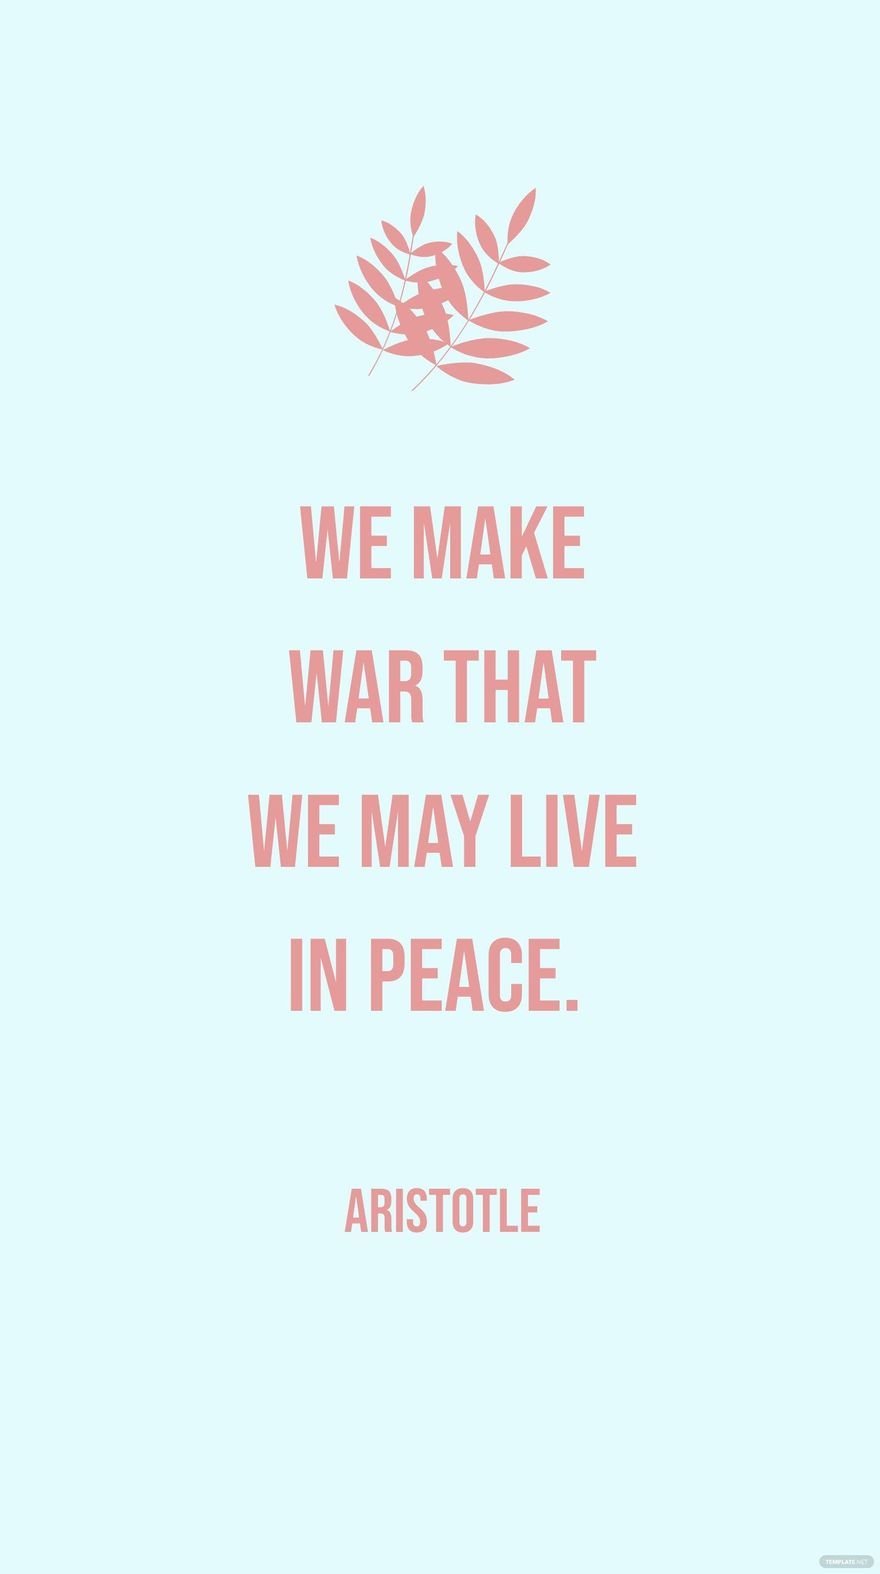 Free Aristotle - We make war that we may live in peace. in JPG